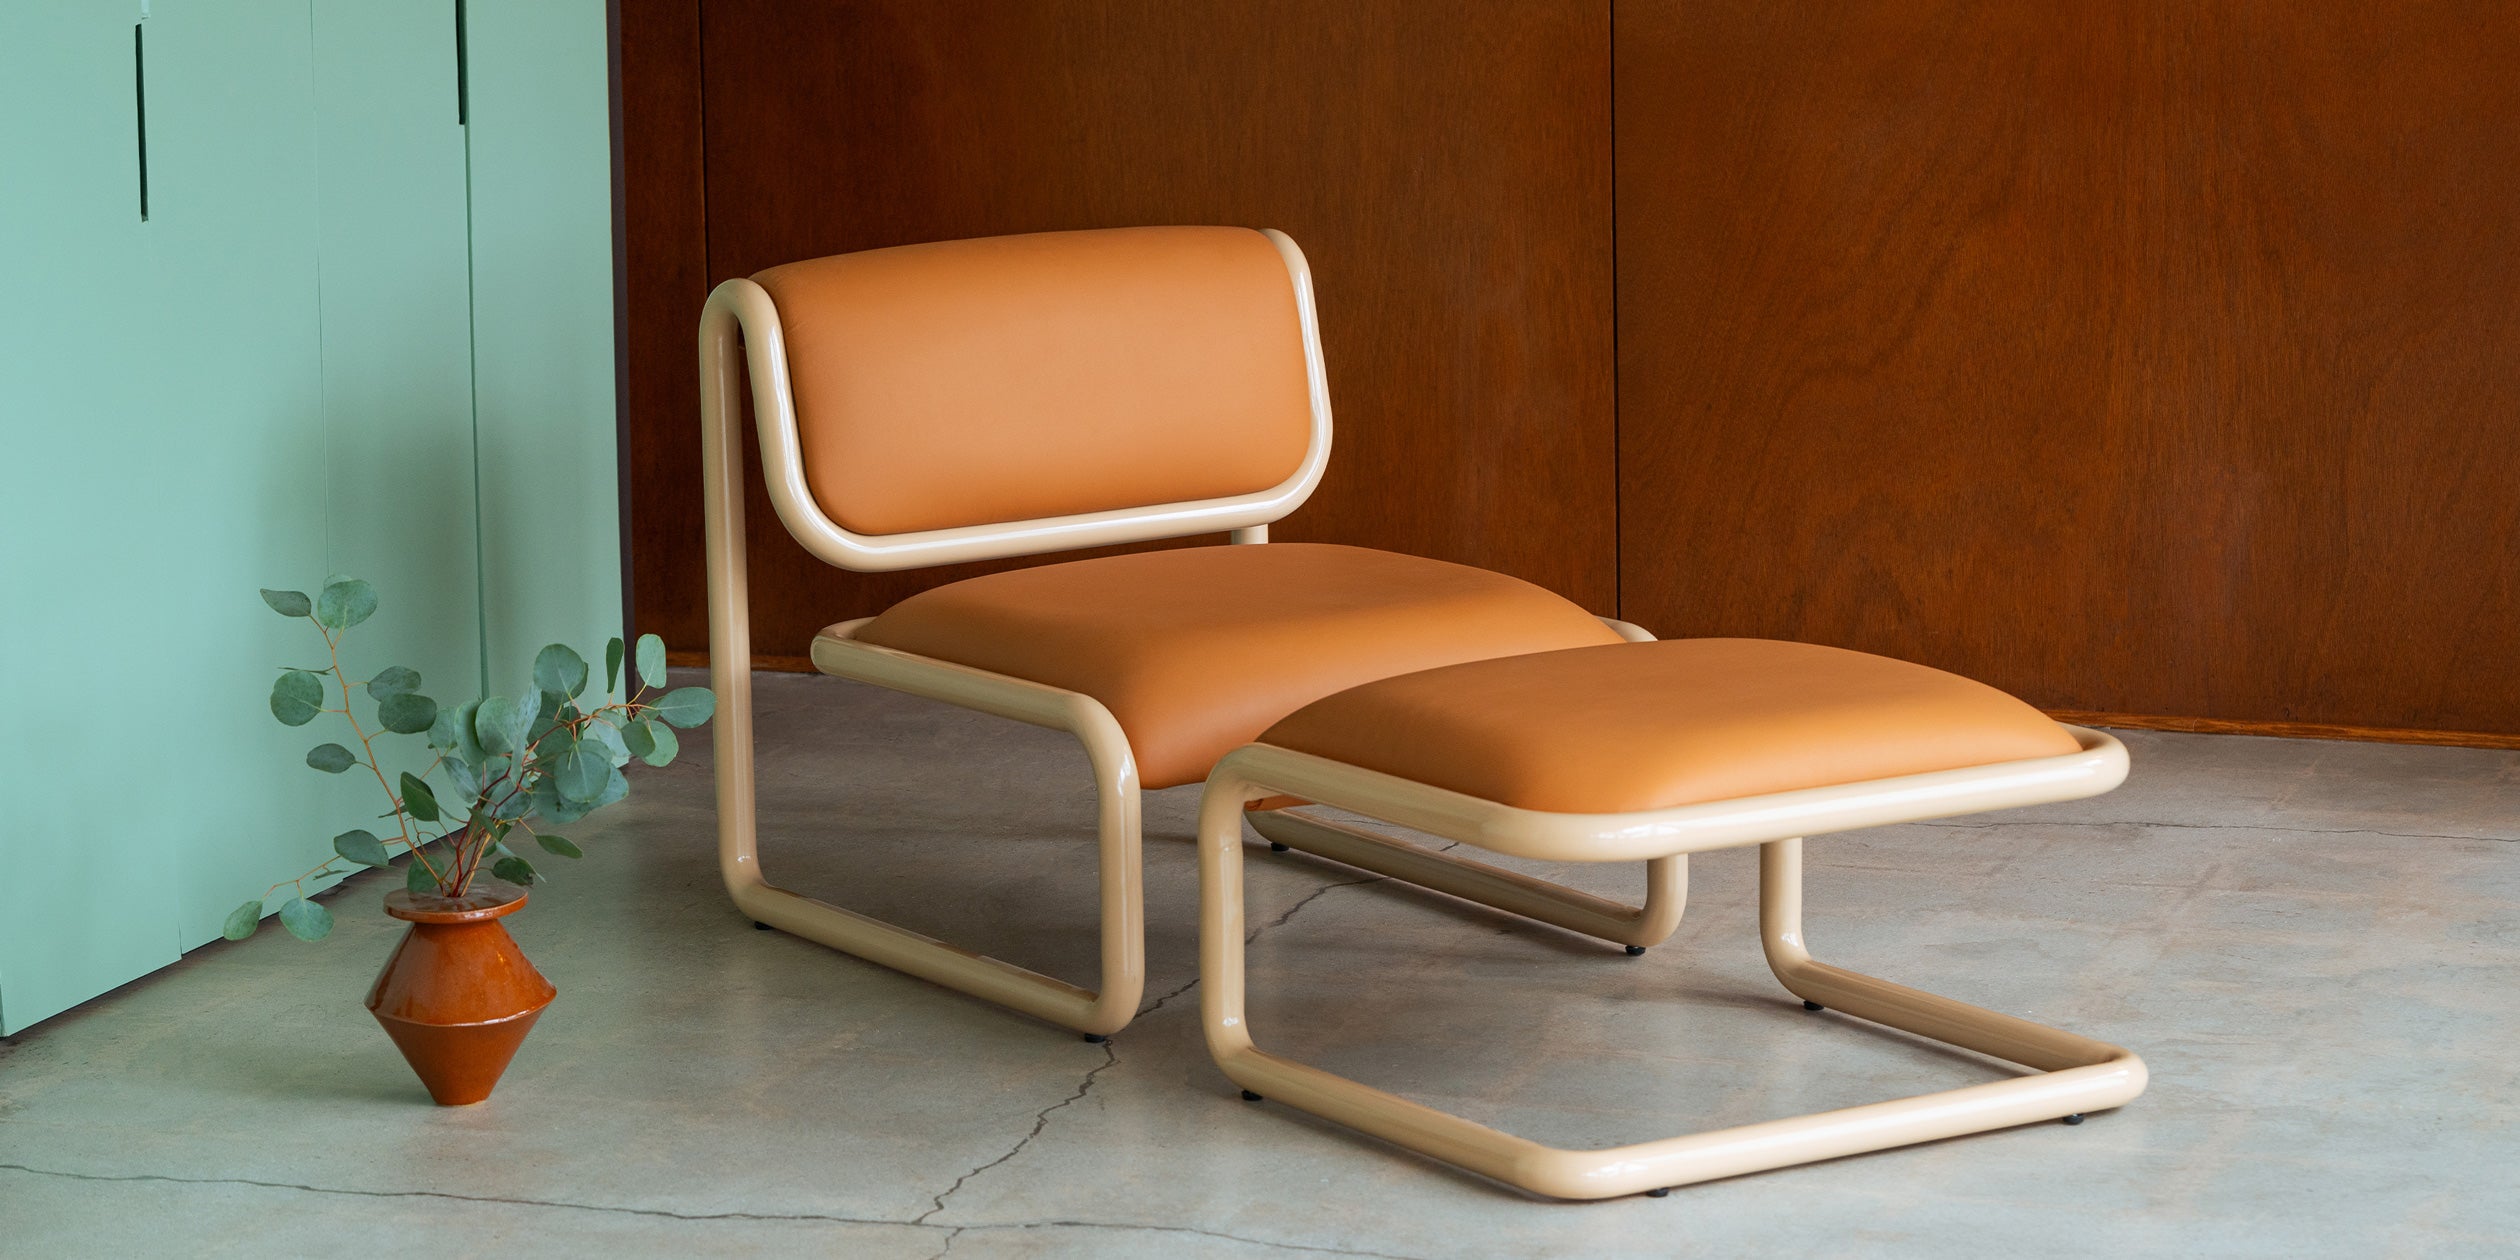 Tube Lounge Chair and Tube Ottoman in Tan with Vegan Leather